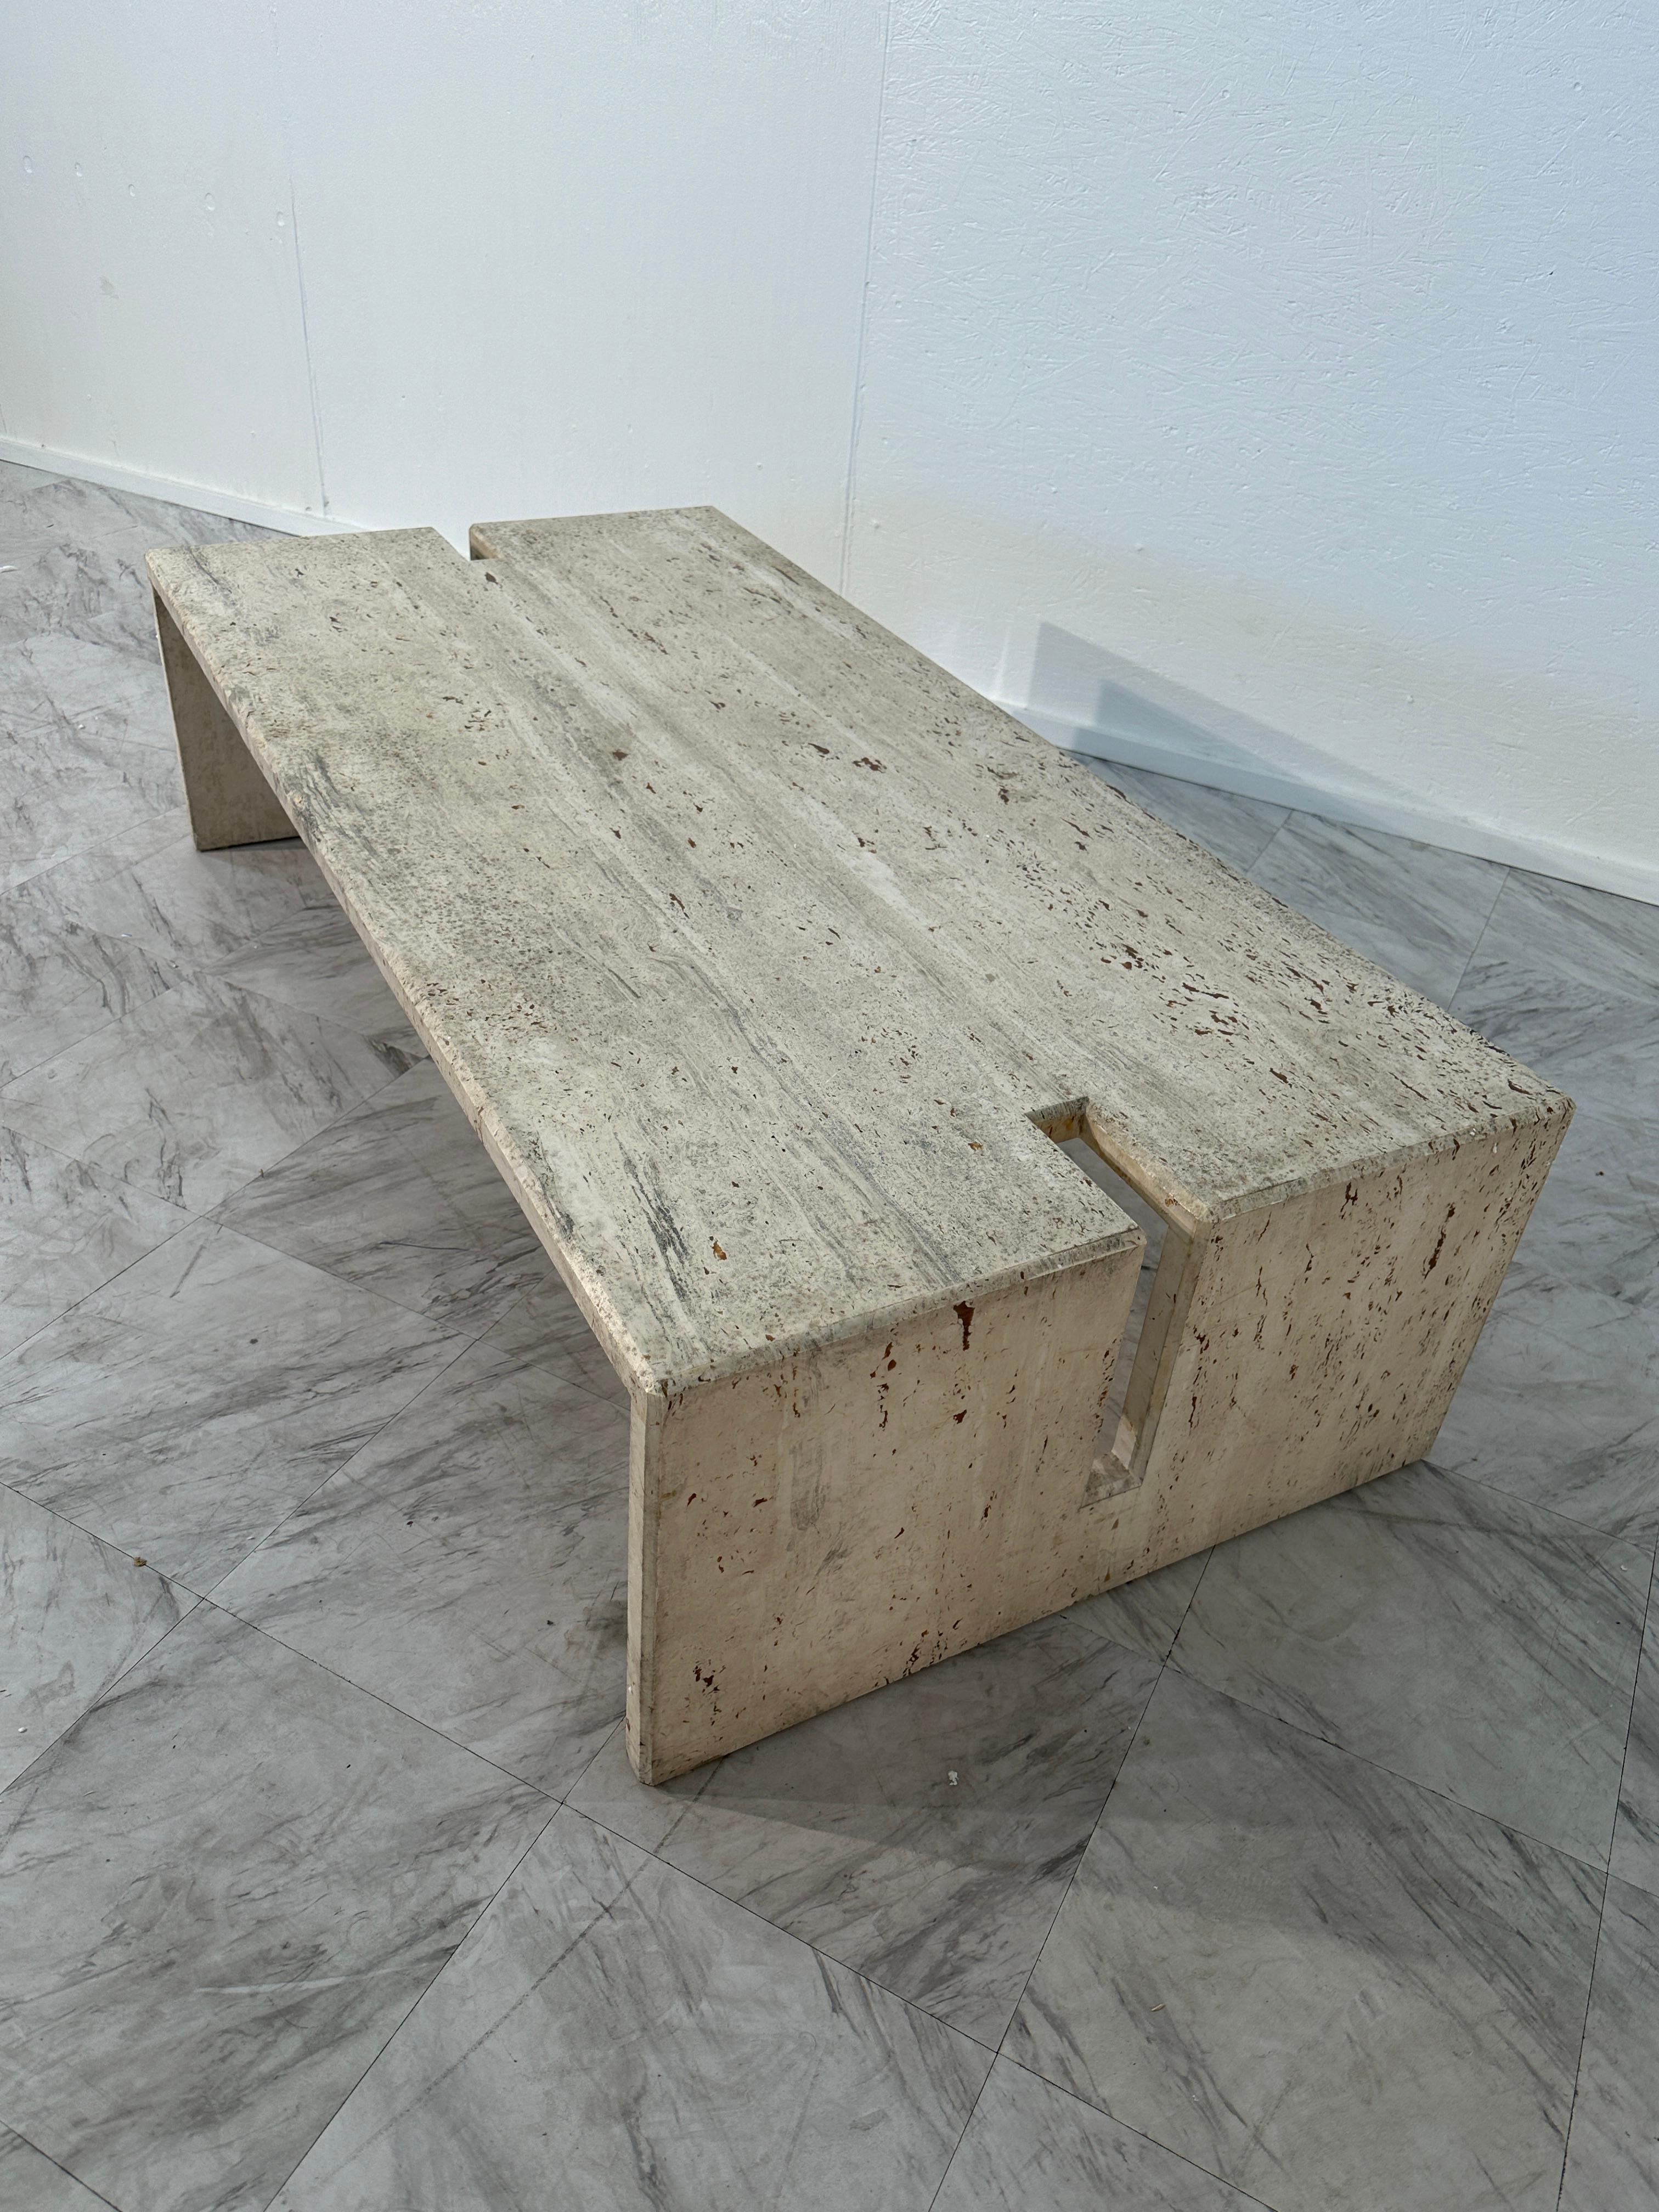 The Mid Century Italian Travertine Coffee Table by Studio A, crafted in the 1970s, is a timeless piece characterized by its fully travertine construction and sleek rectangular shape. The table embodies the distinctive mid-century design aesthetic,